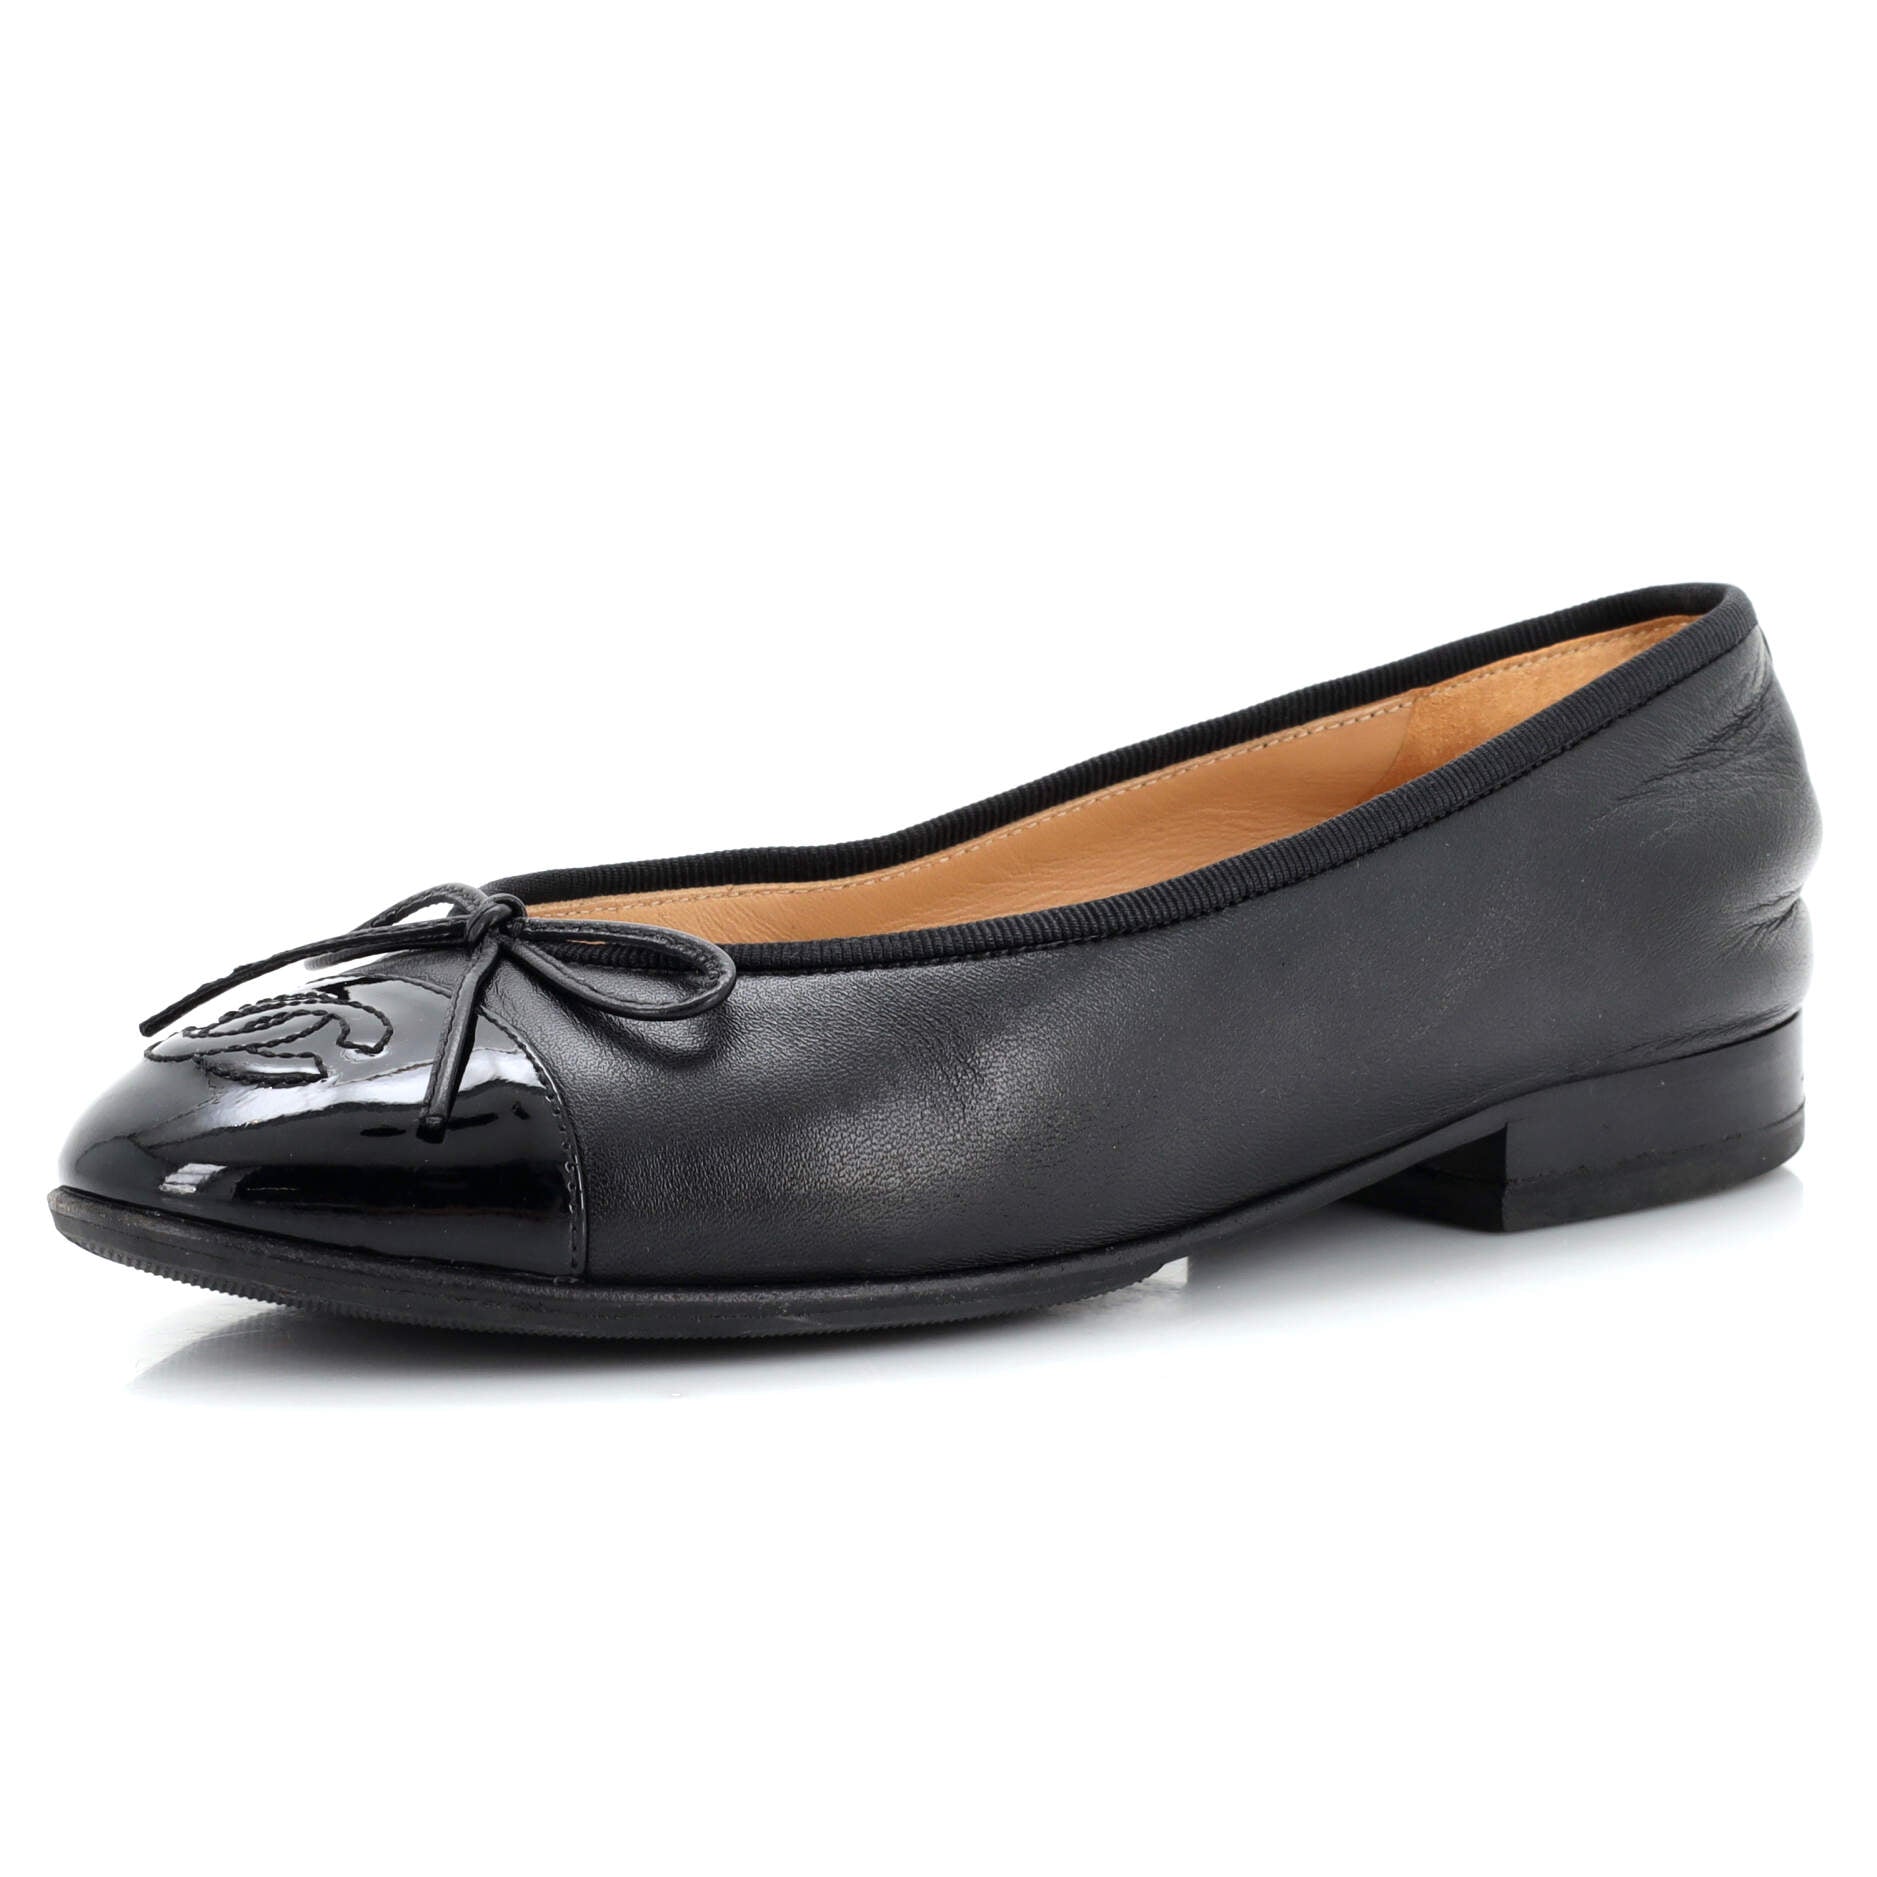 Women's CC Cap Toe Bow Ballerina Flats Leather and Patent